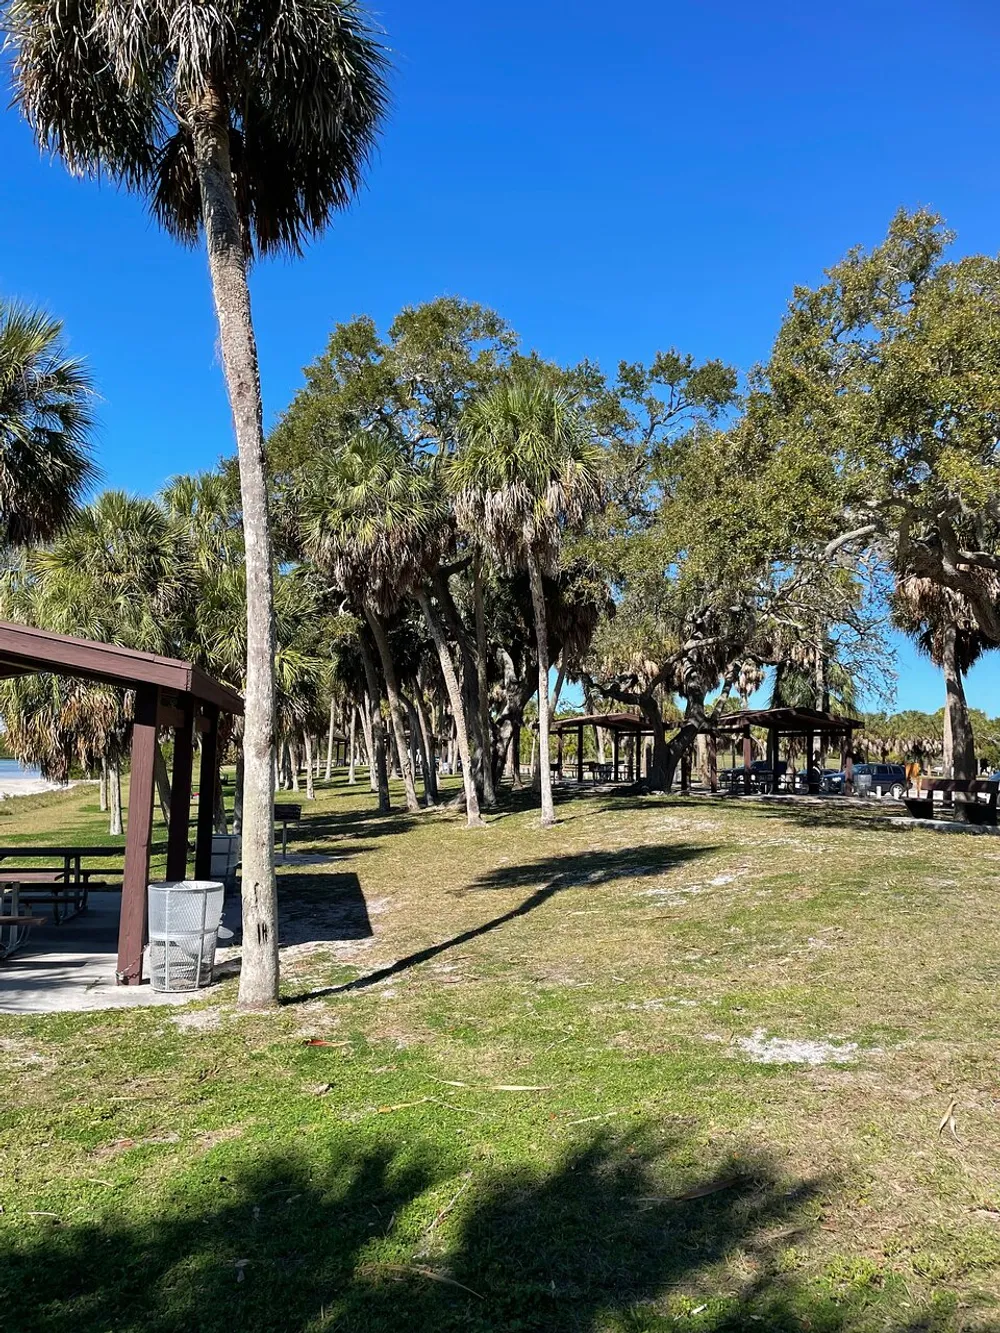 The image shows a sunny park with picnic tables surrounded by palm trees and live oaks suggesting a pleasant area for outdoor gatherings